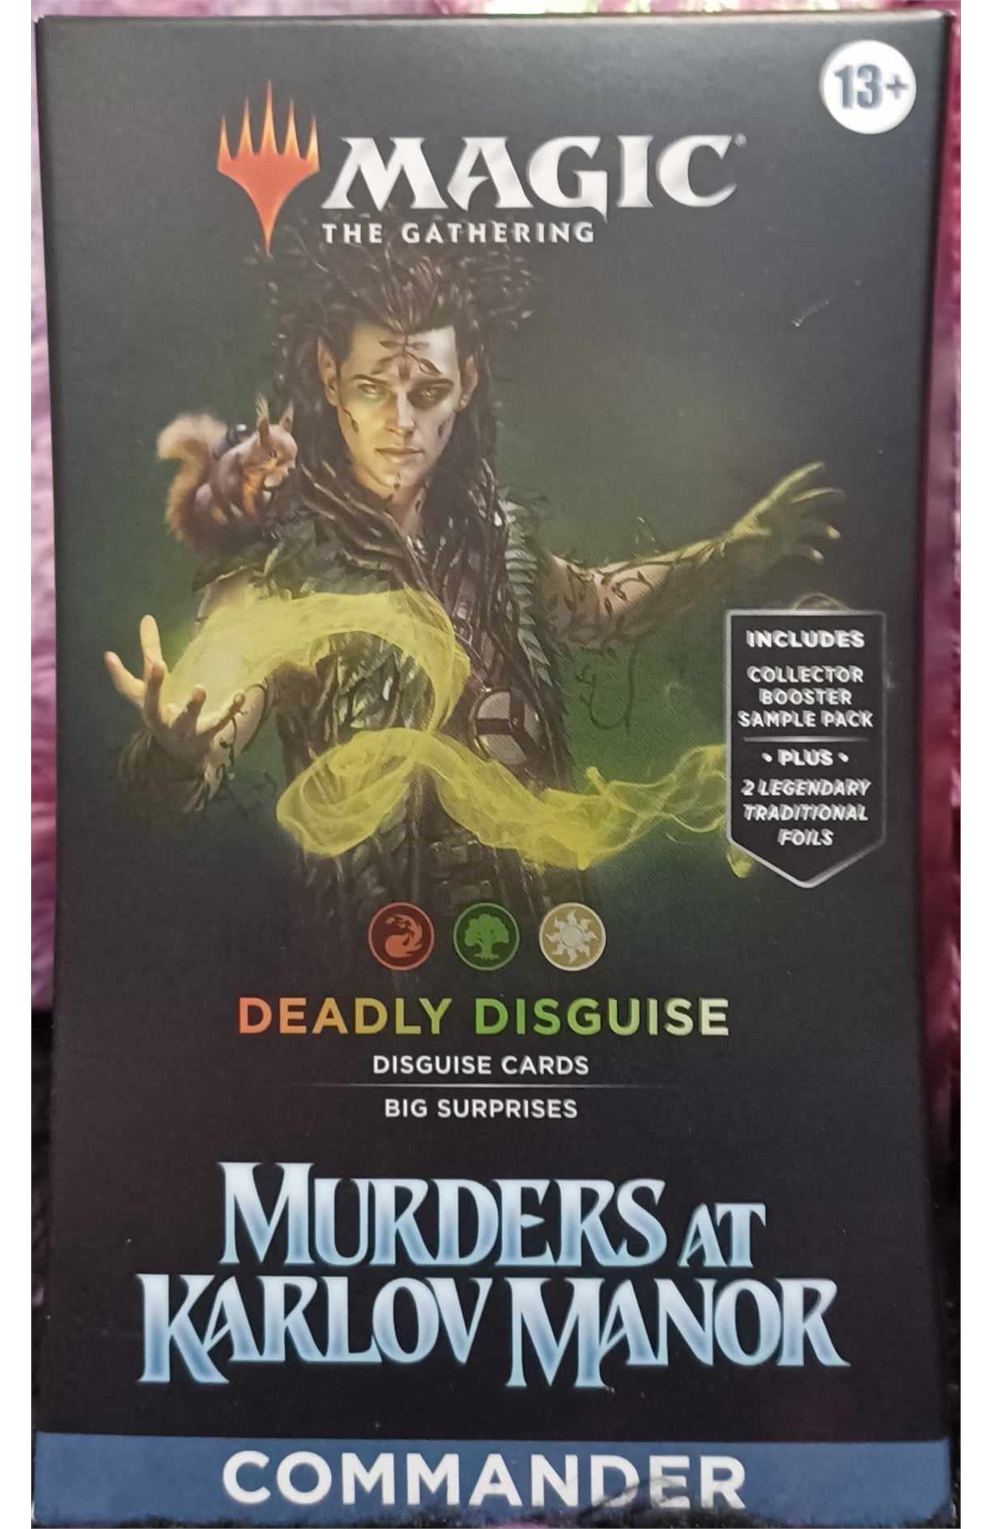 Magic The Gathering Tcg: Murders At Karlov Manor Commander Deck - Deadly Disguise [R,G,W]